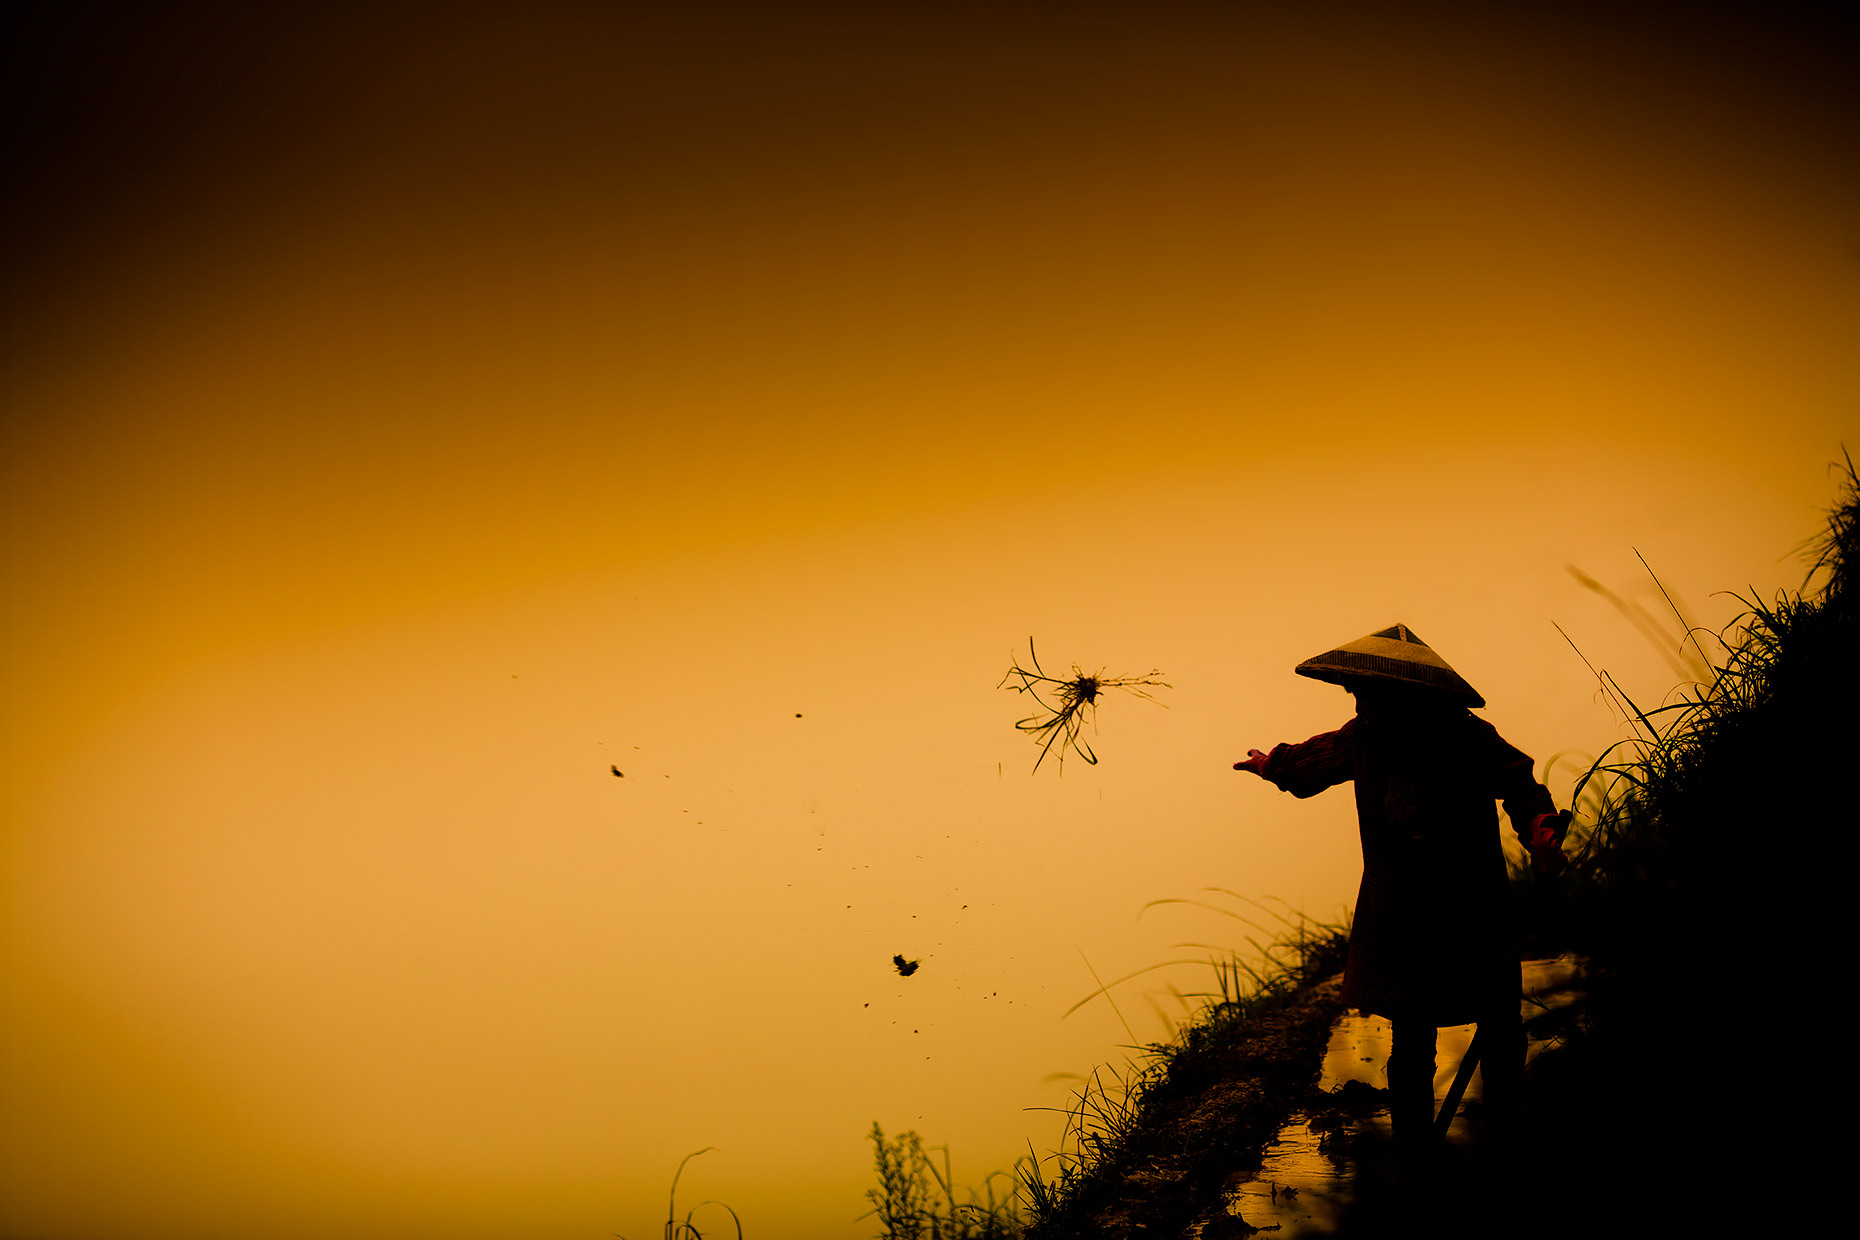 A Guangxi province highlands farmer clears a rice paddy | Scott Gable industrial photographer